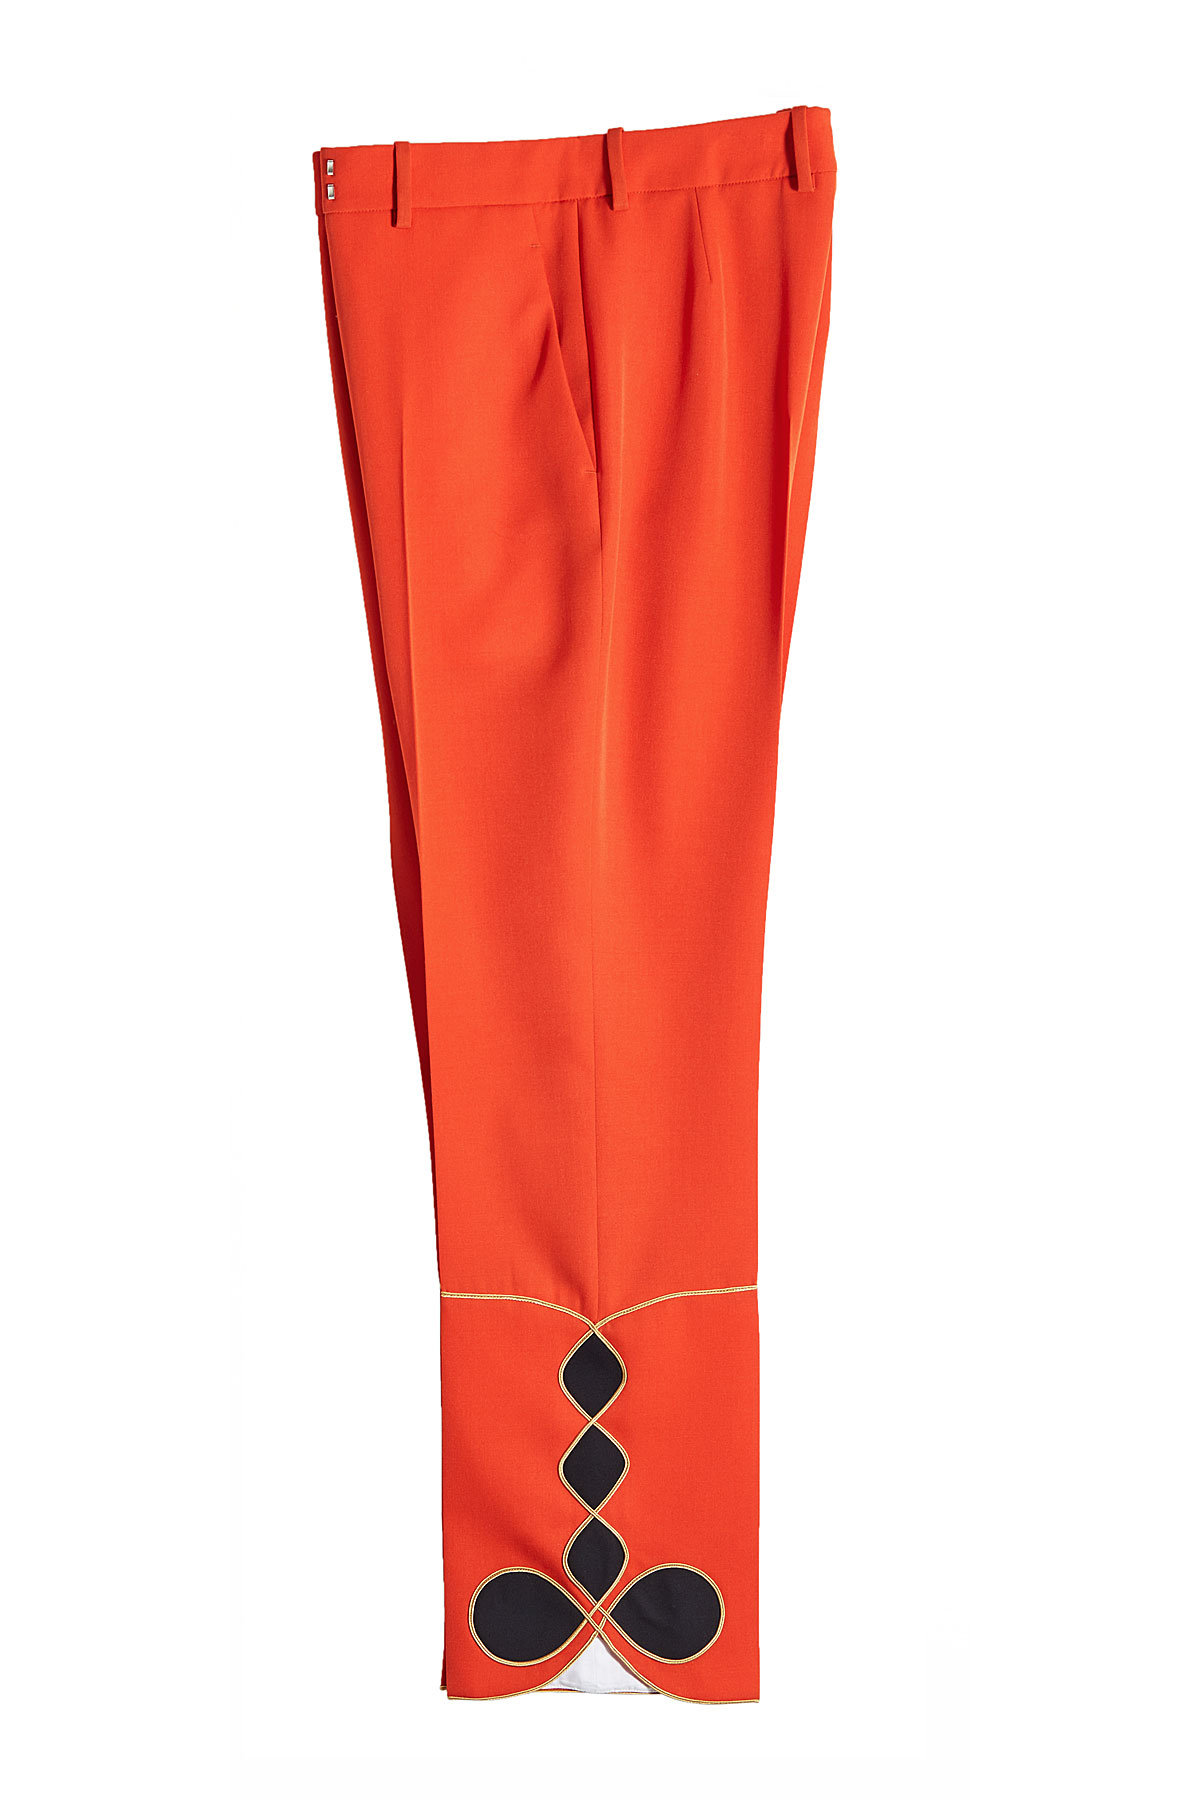 CALVIN KLEIN 205W39NYC - Mariachi Trousers with Embroidery